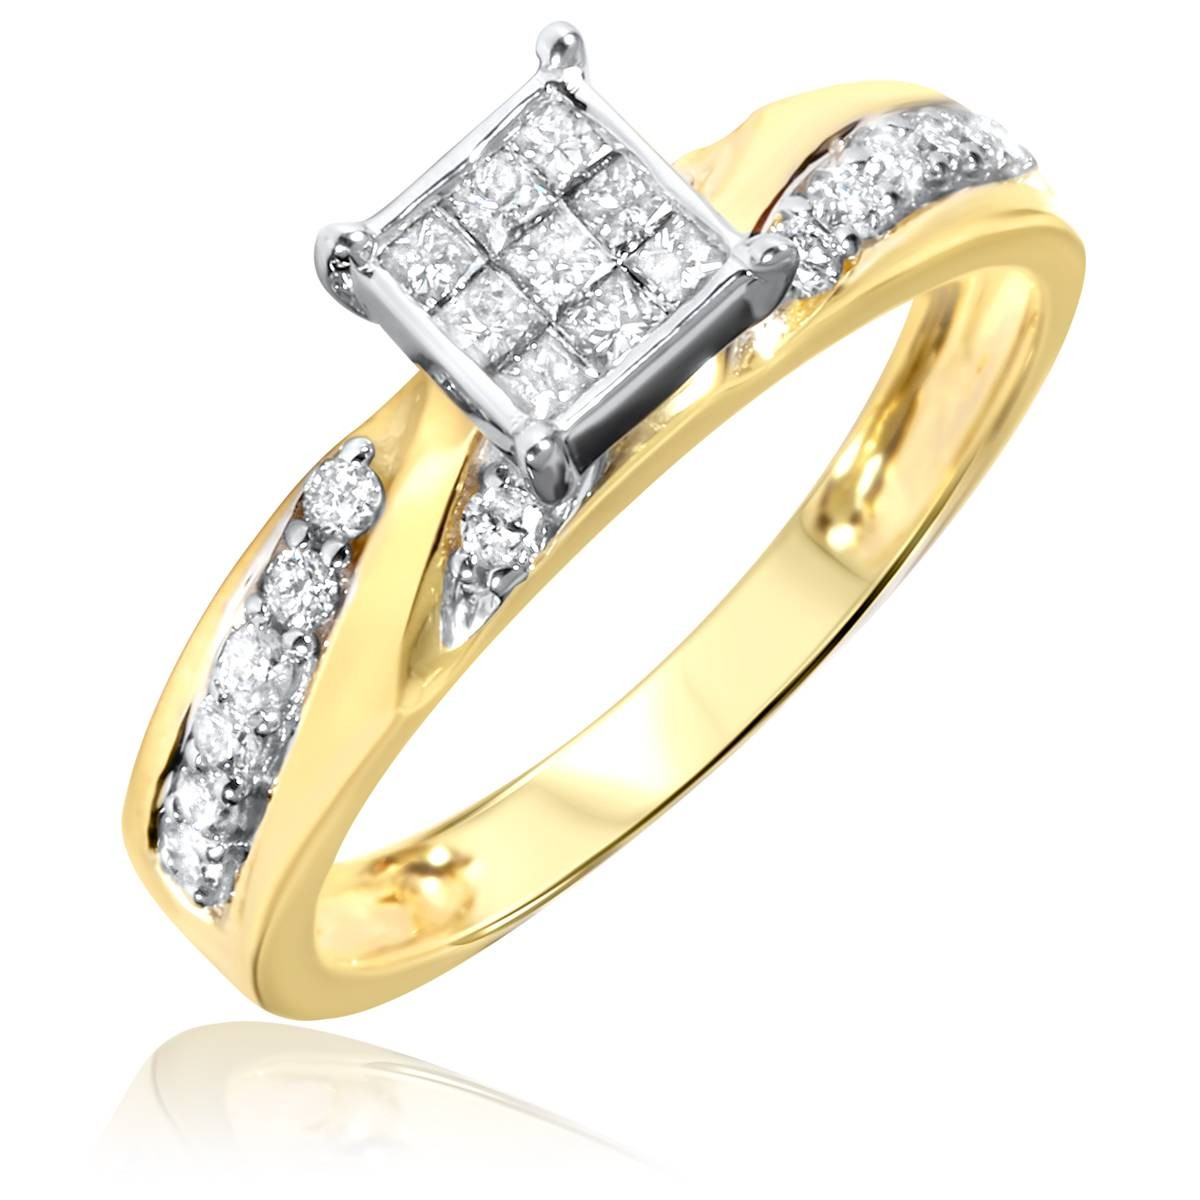 Cheap Gold Wedding Rings
 15 Collection of Cheap Yellow Gold Wedding Rings